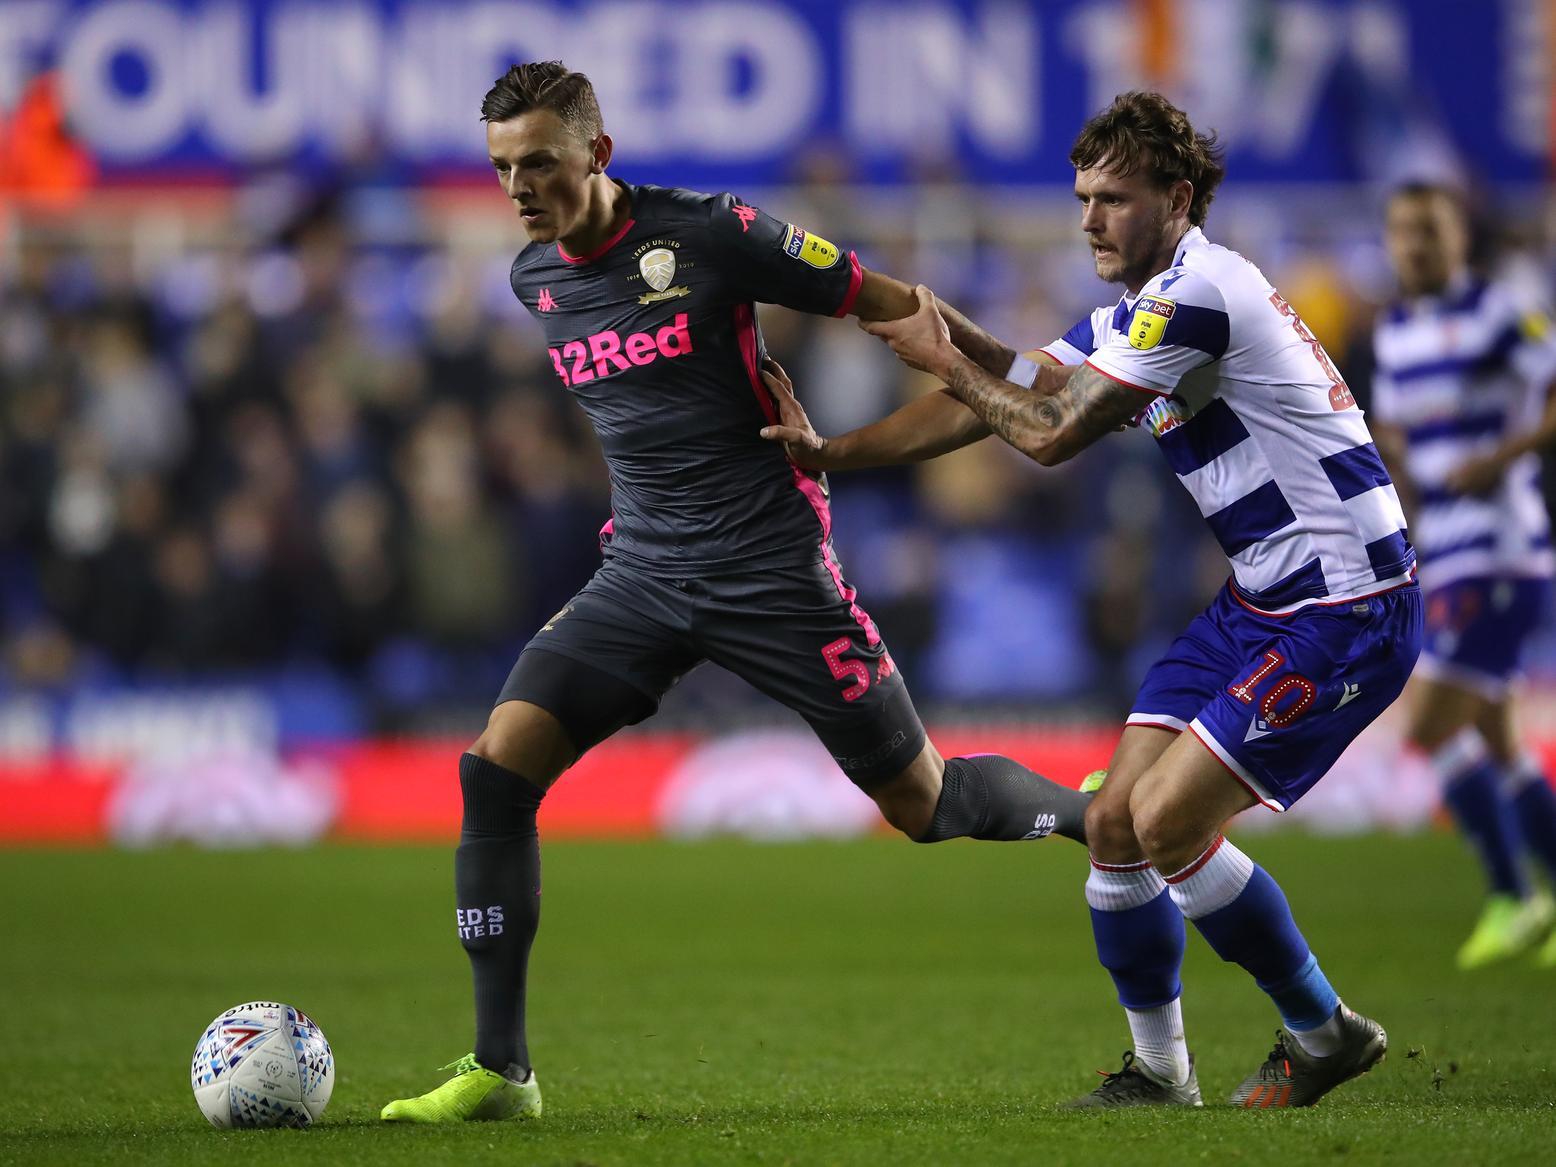 Leeds director Victor Orta is said to have knocked back calls to sign another centre-back last summer, such was his faith in Brighton loanee Ben White to become a star at Elland Road. (The Athletic)